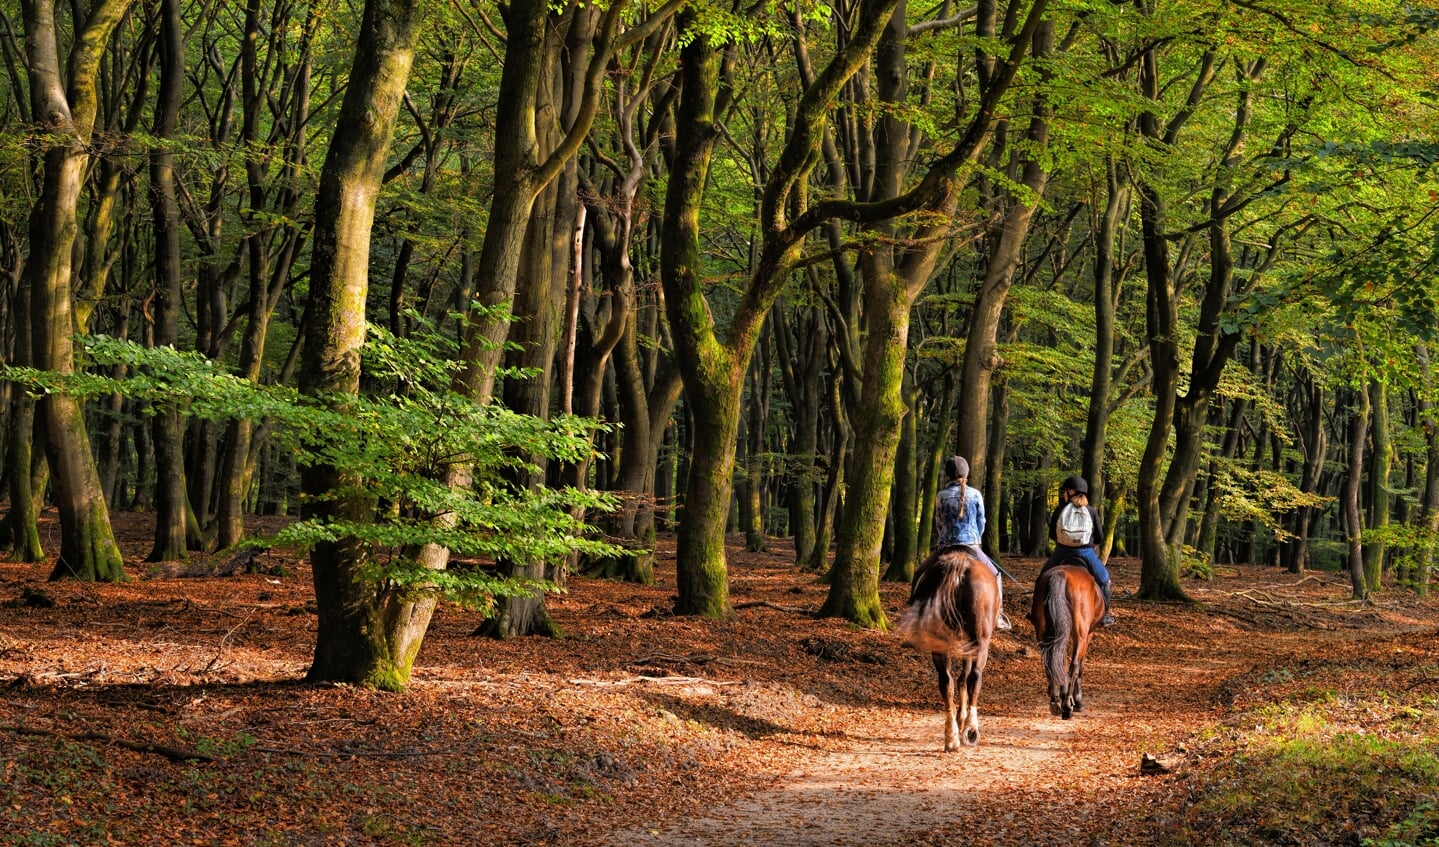 Rear view on Two women horseback riding through autumn colored beech tree forest